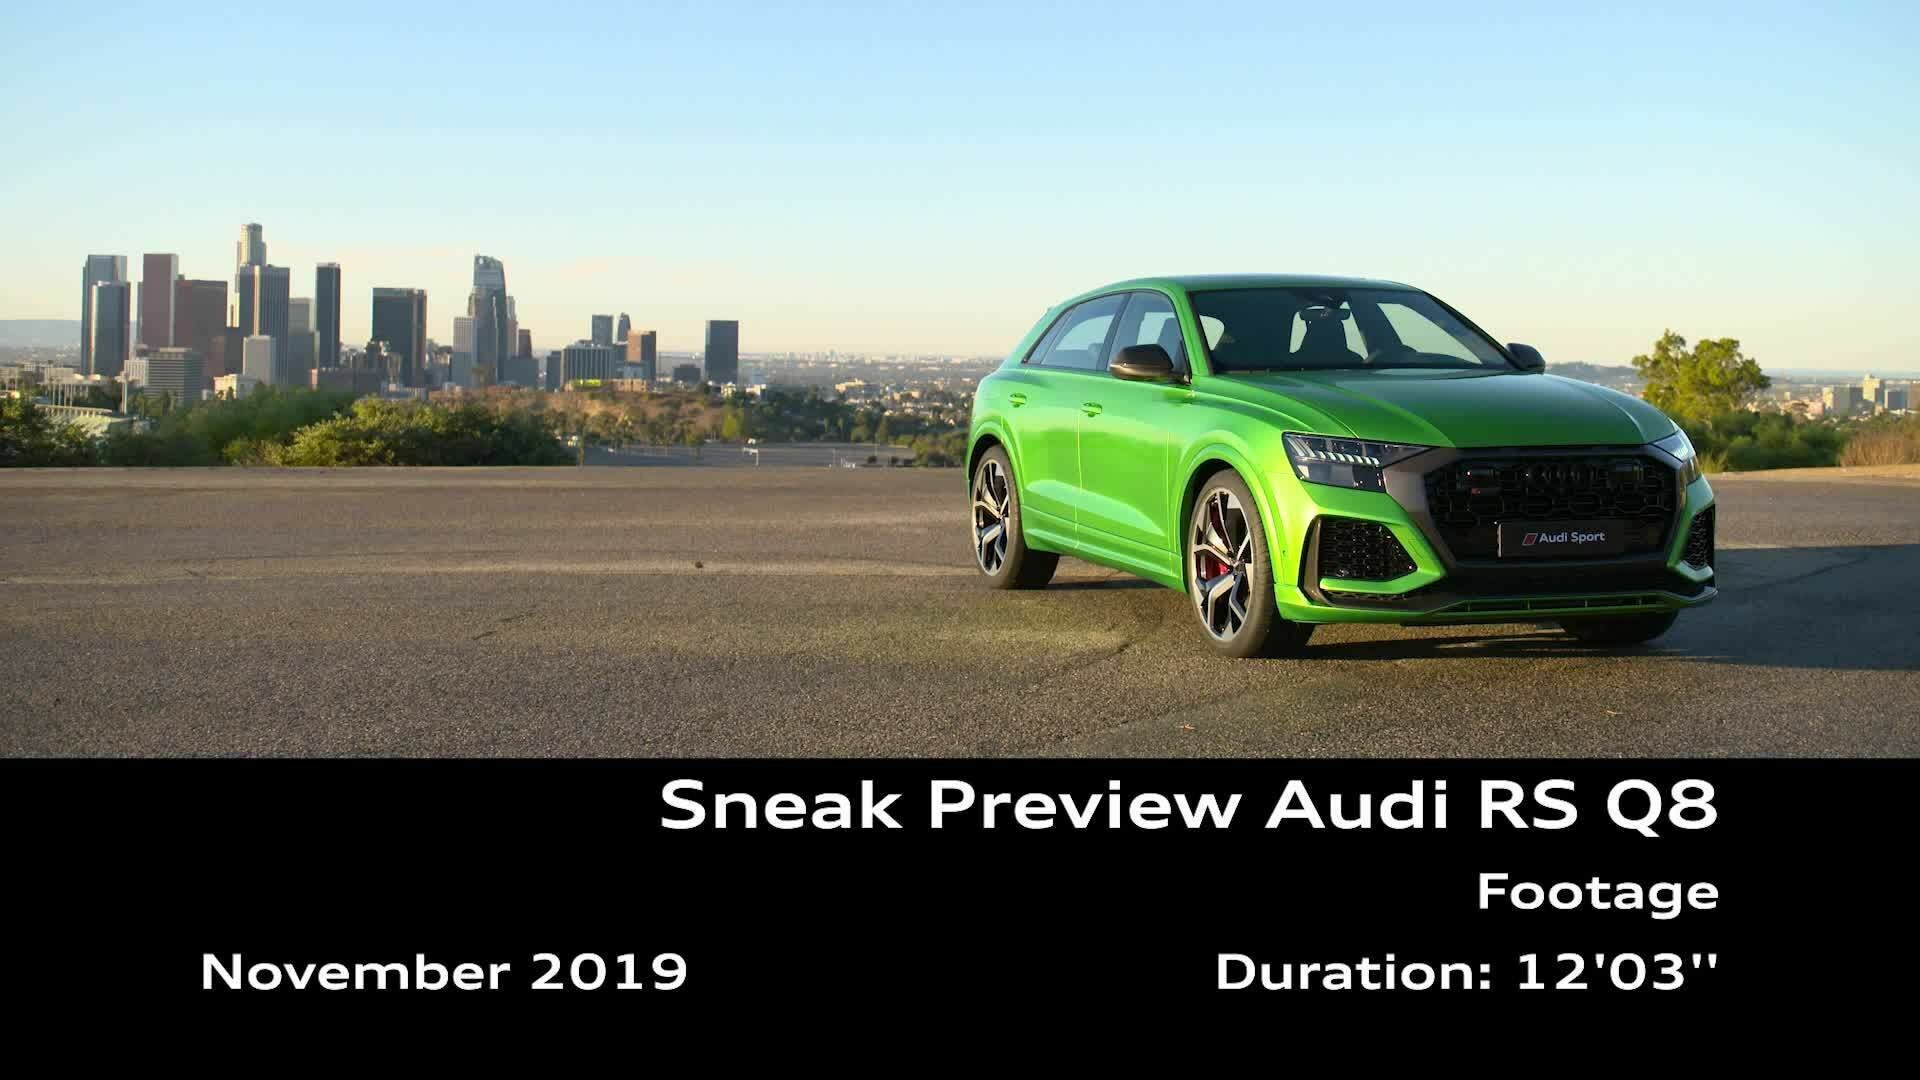 Footage: Audi e-tron Sportback on location in Los Angeles